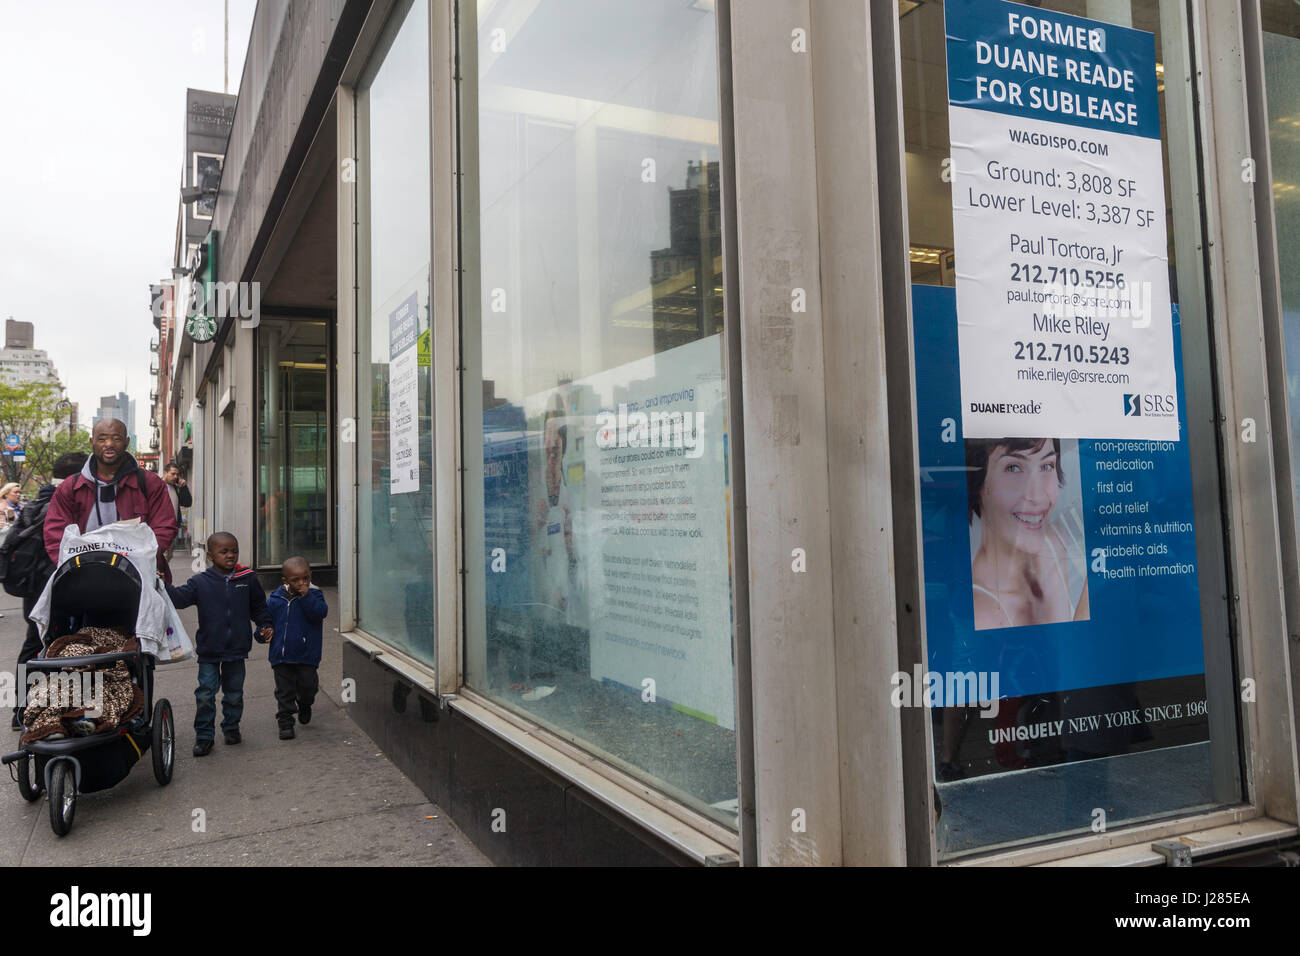 New York, NY, USA 24 April 2017 - A former Duane Reade with the company logo and sign removed continues to attract customers. The regional ever present pharmacutical chain known for having a shop on every other block in the New York City Metropolitan area, began closing some of it's locations this year.  In some instances the parent company, Walgreen's Boots Alliance, cited expiring leases but in this Greenwich Village outlet the company is offering to sublease the space. ©Stacy Walsh Rosenstock Stock Photo